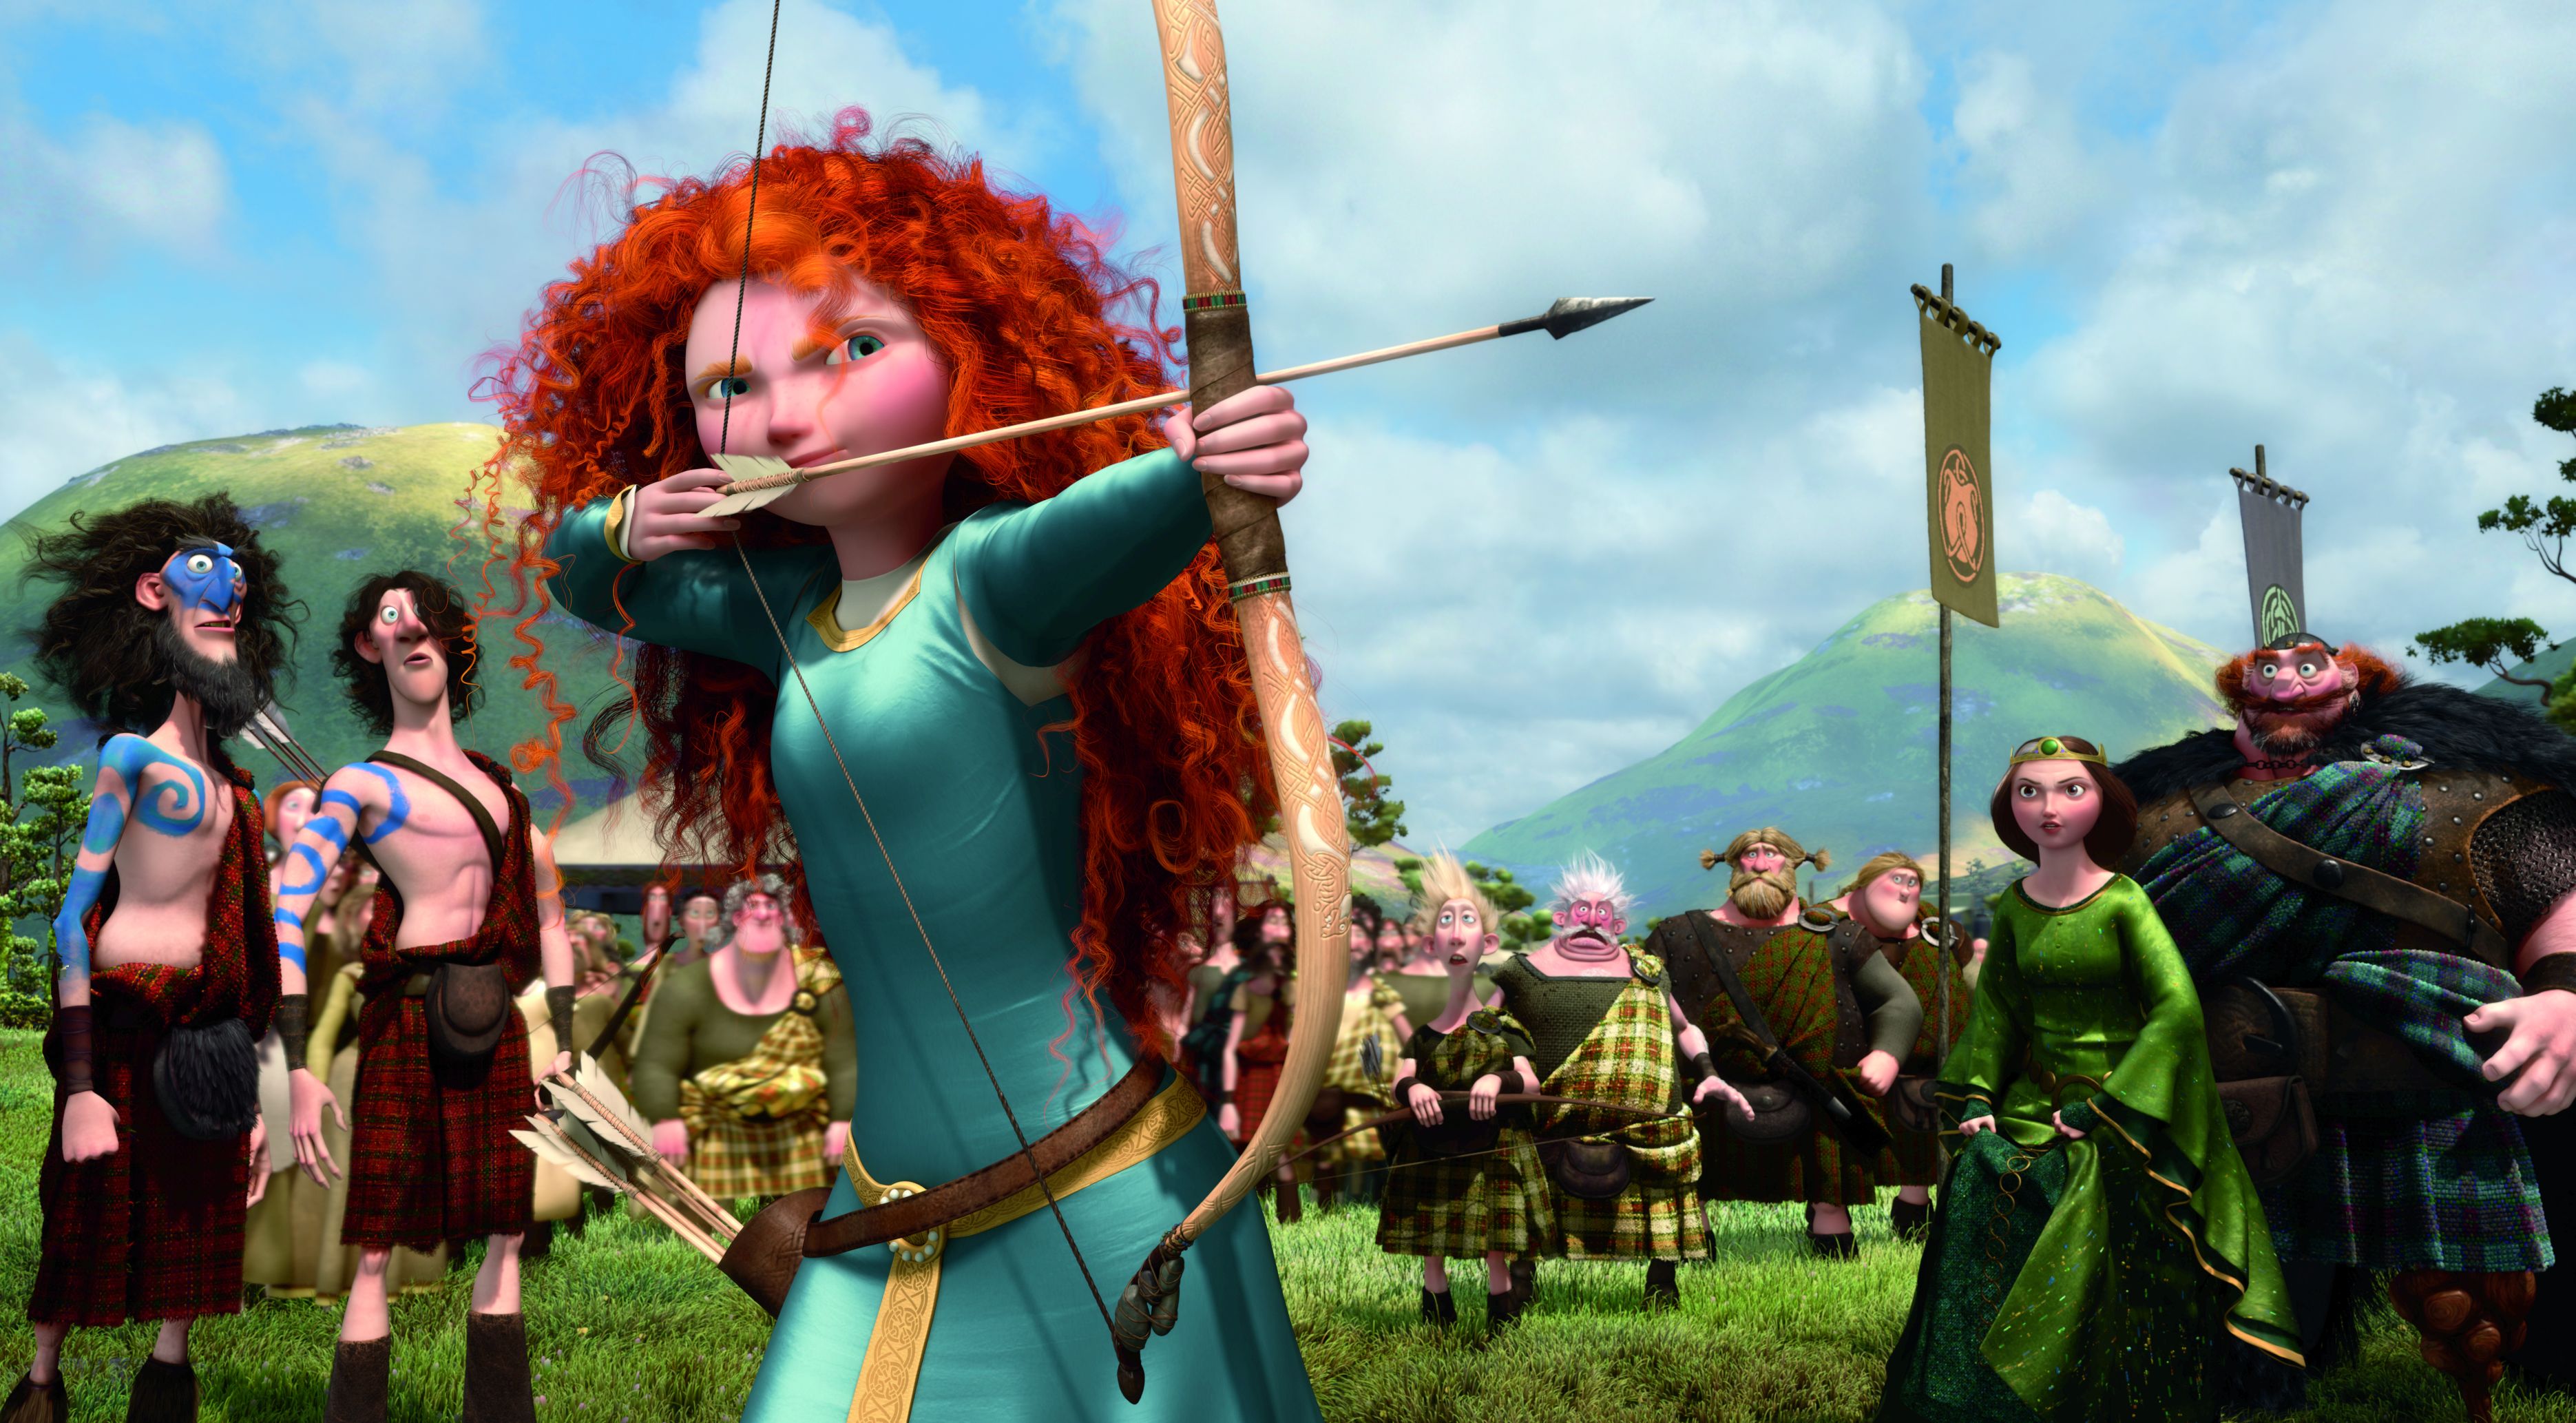 Merida ready to shoot her bow and impress everyone - Brave